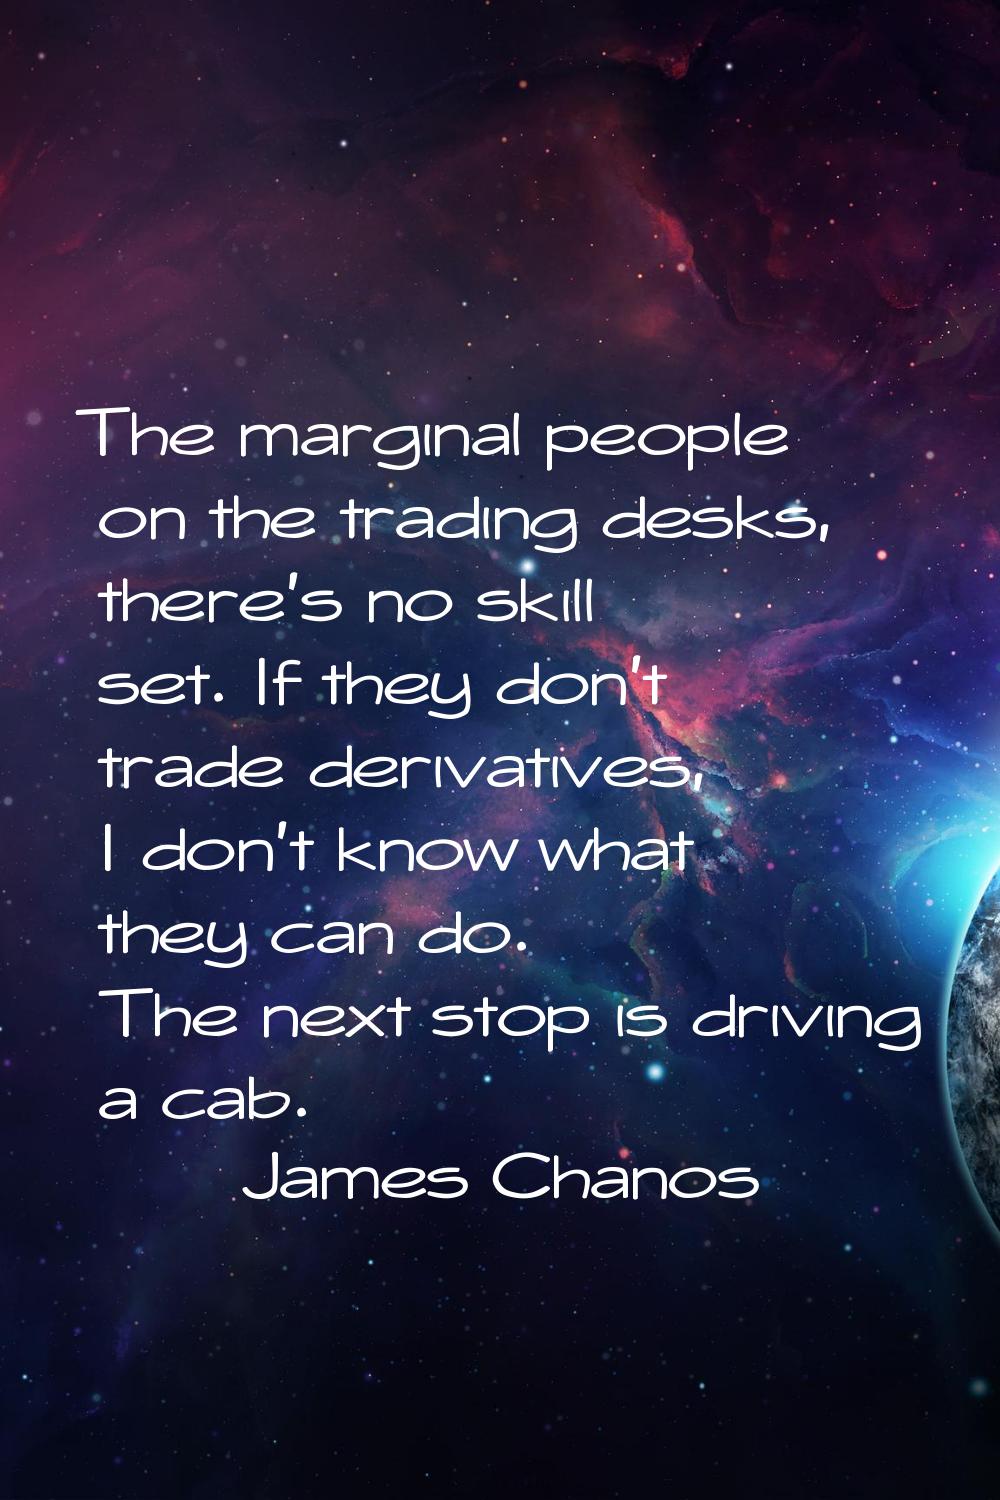 The marginal people on the trading desks, there's no skill set. If they don't trade derivatives, I 